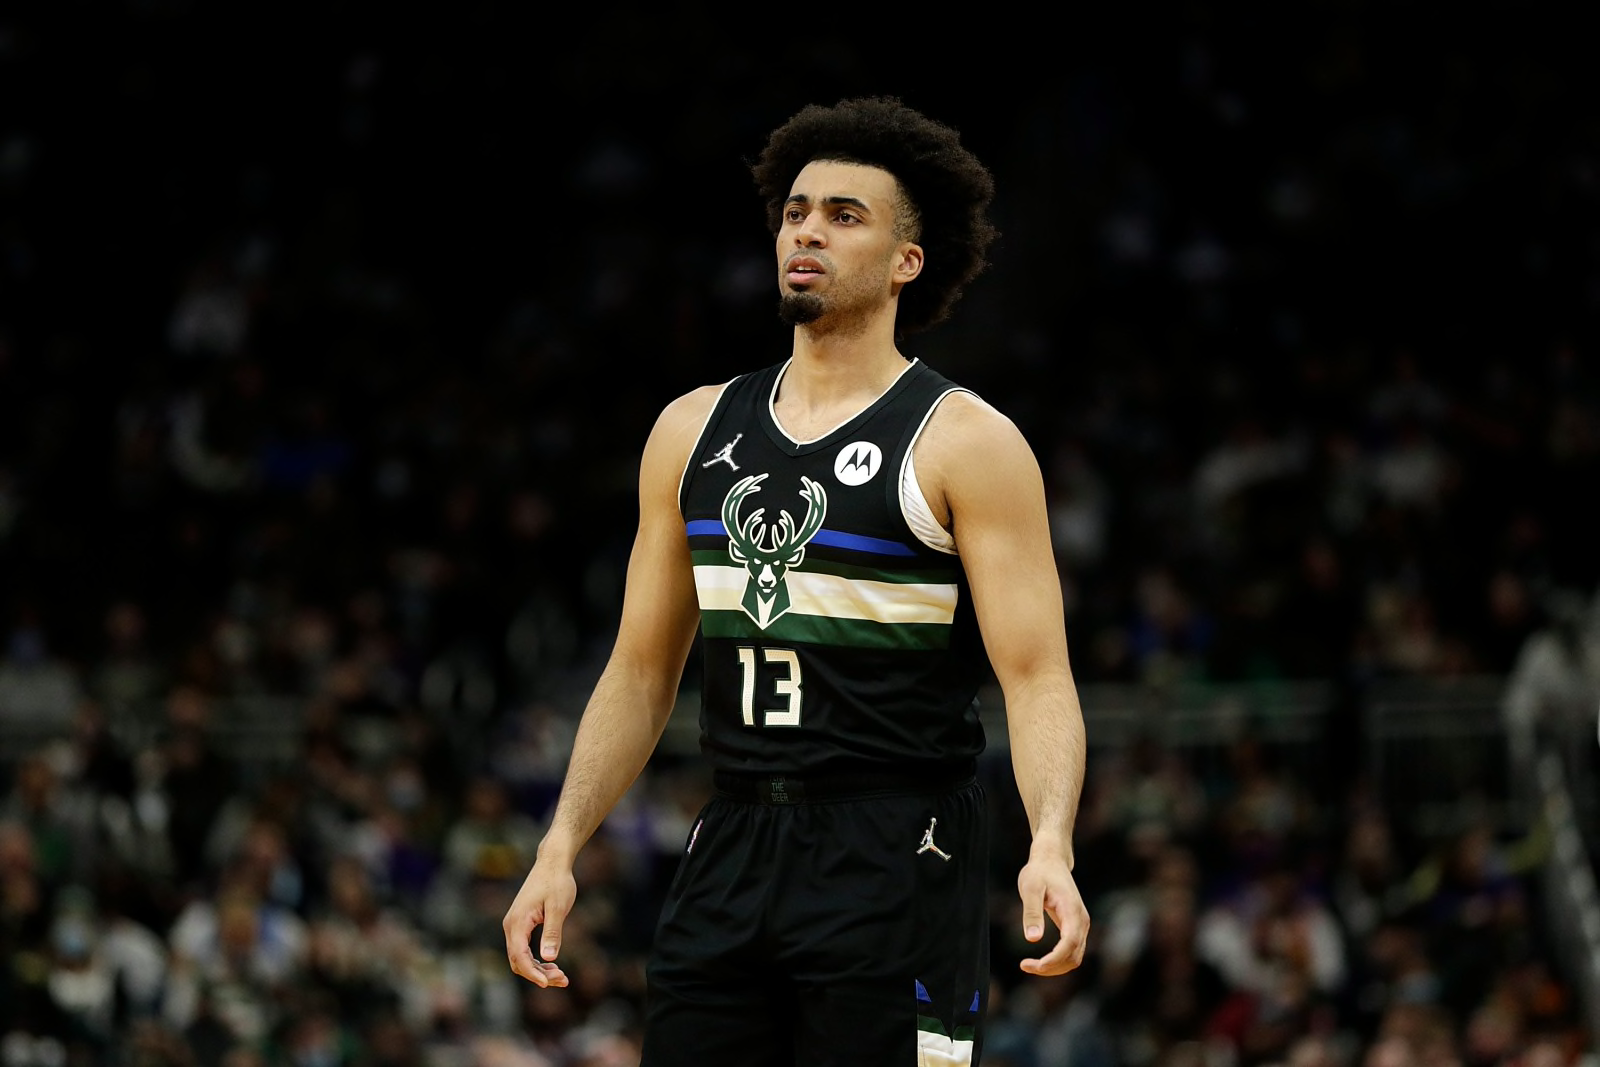 Better Know a Player: The importance of Jordan Nwora to